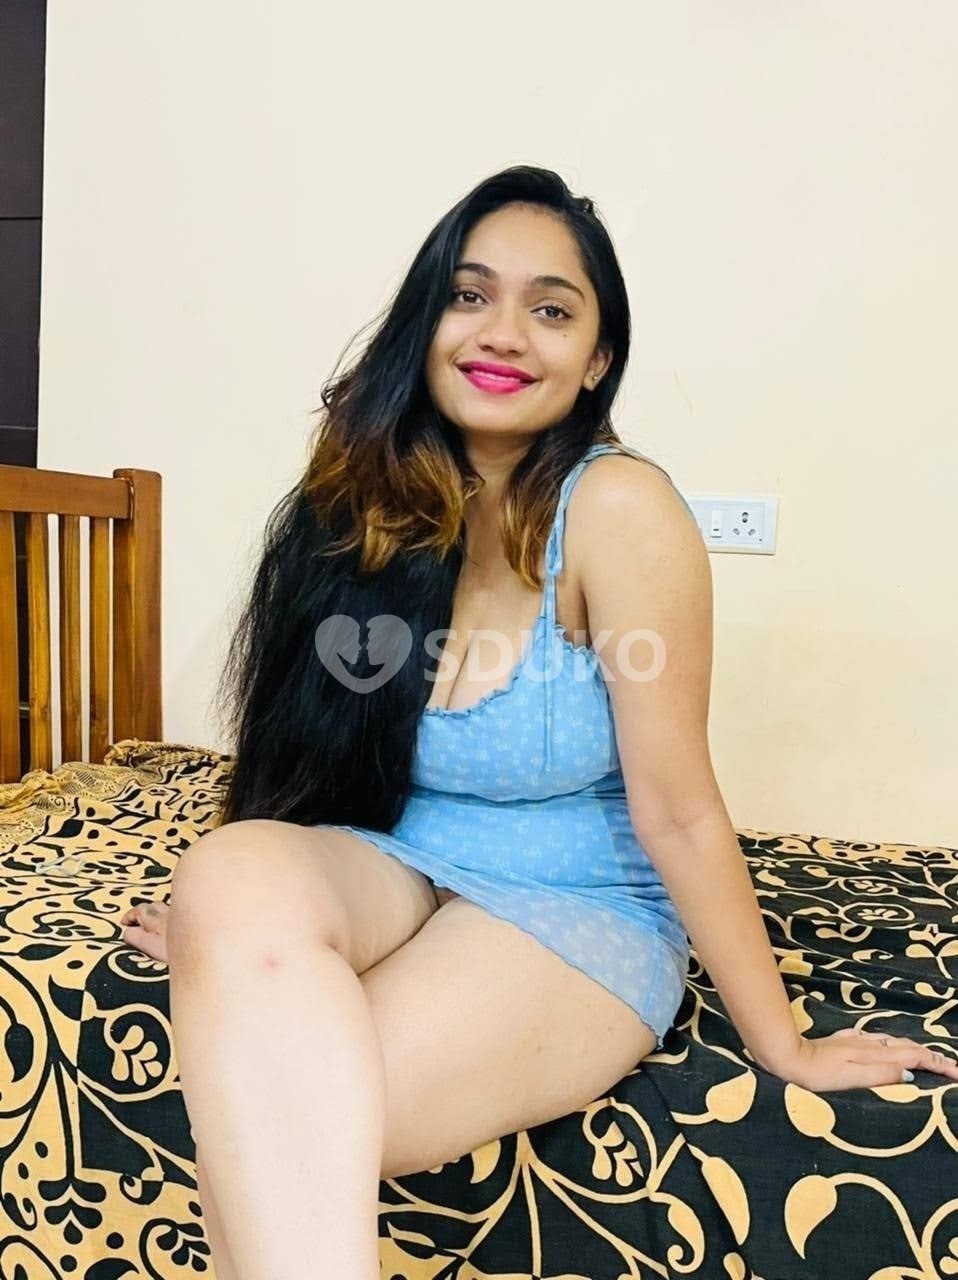 Vashi ✨✨✨ Best call girl service in low price high profile call girls available call me anytime this number only